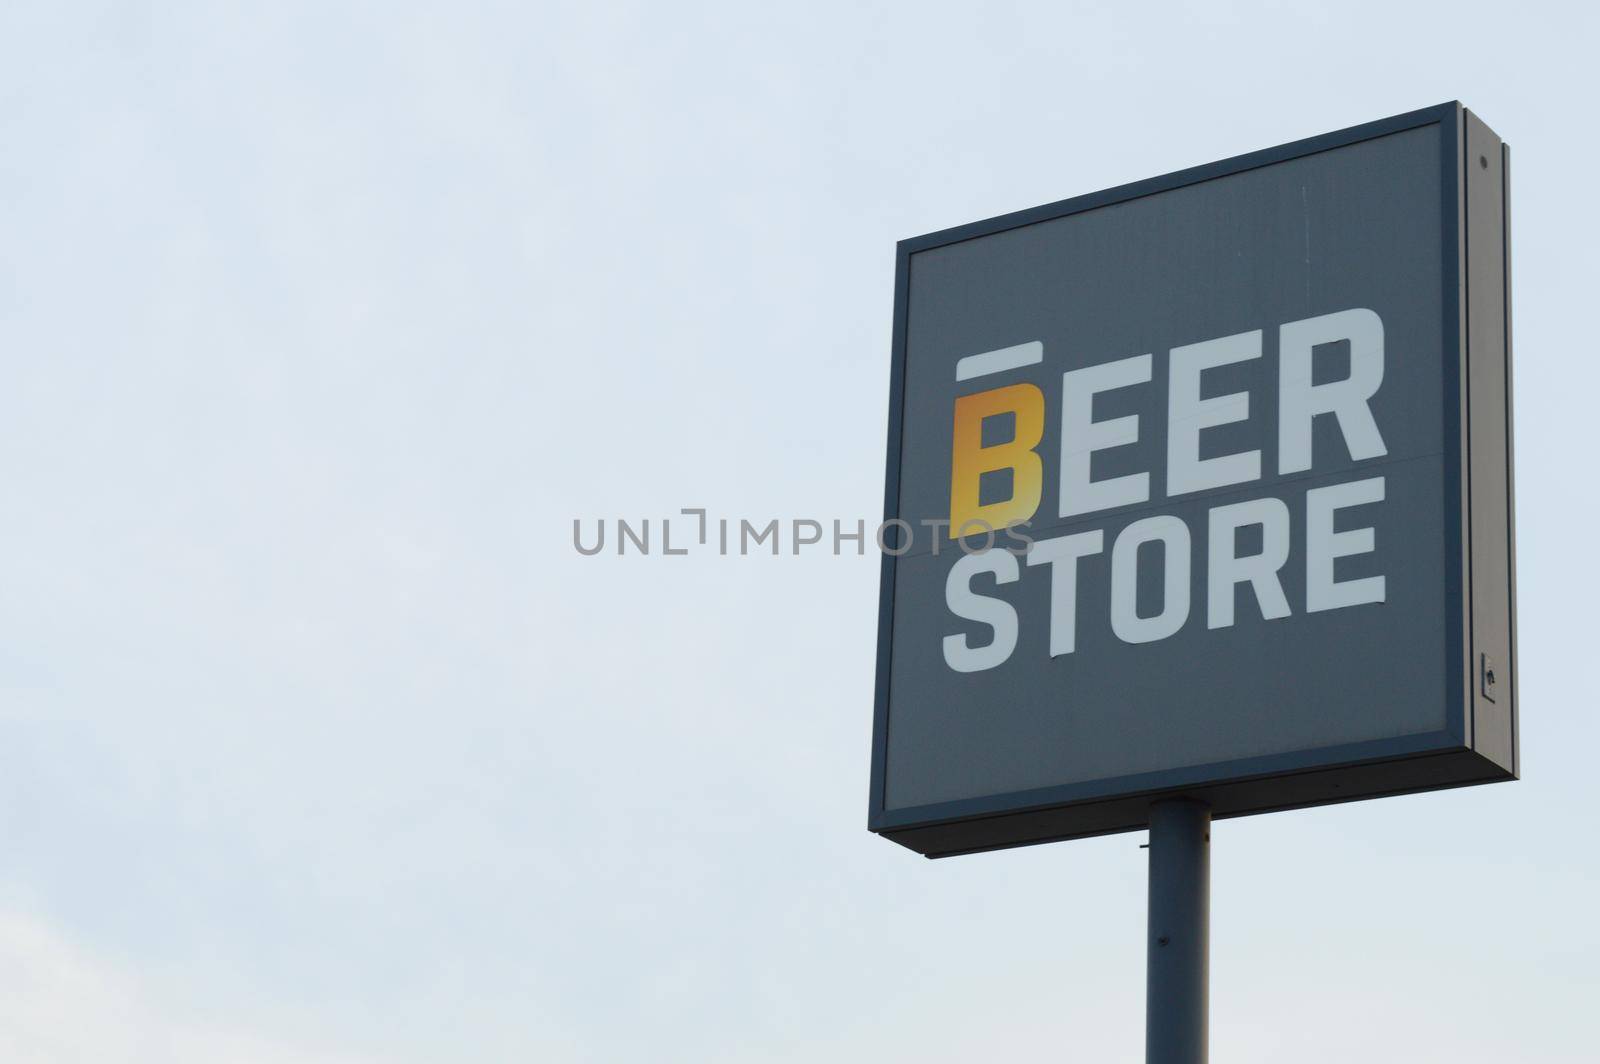 SMITHS FALLS, ONTARIO, CANADA, MARCH 10, 2021: Closeup view of The Beer Store sign located in the small town of Smiths Falls, ON, during the late winter season.